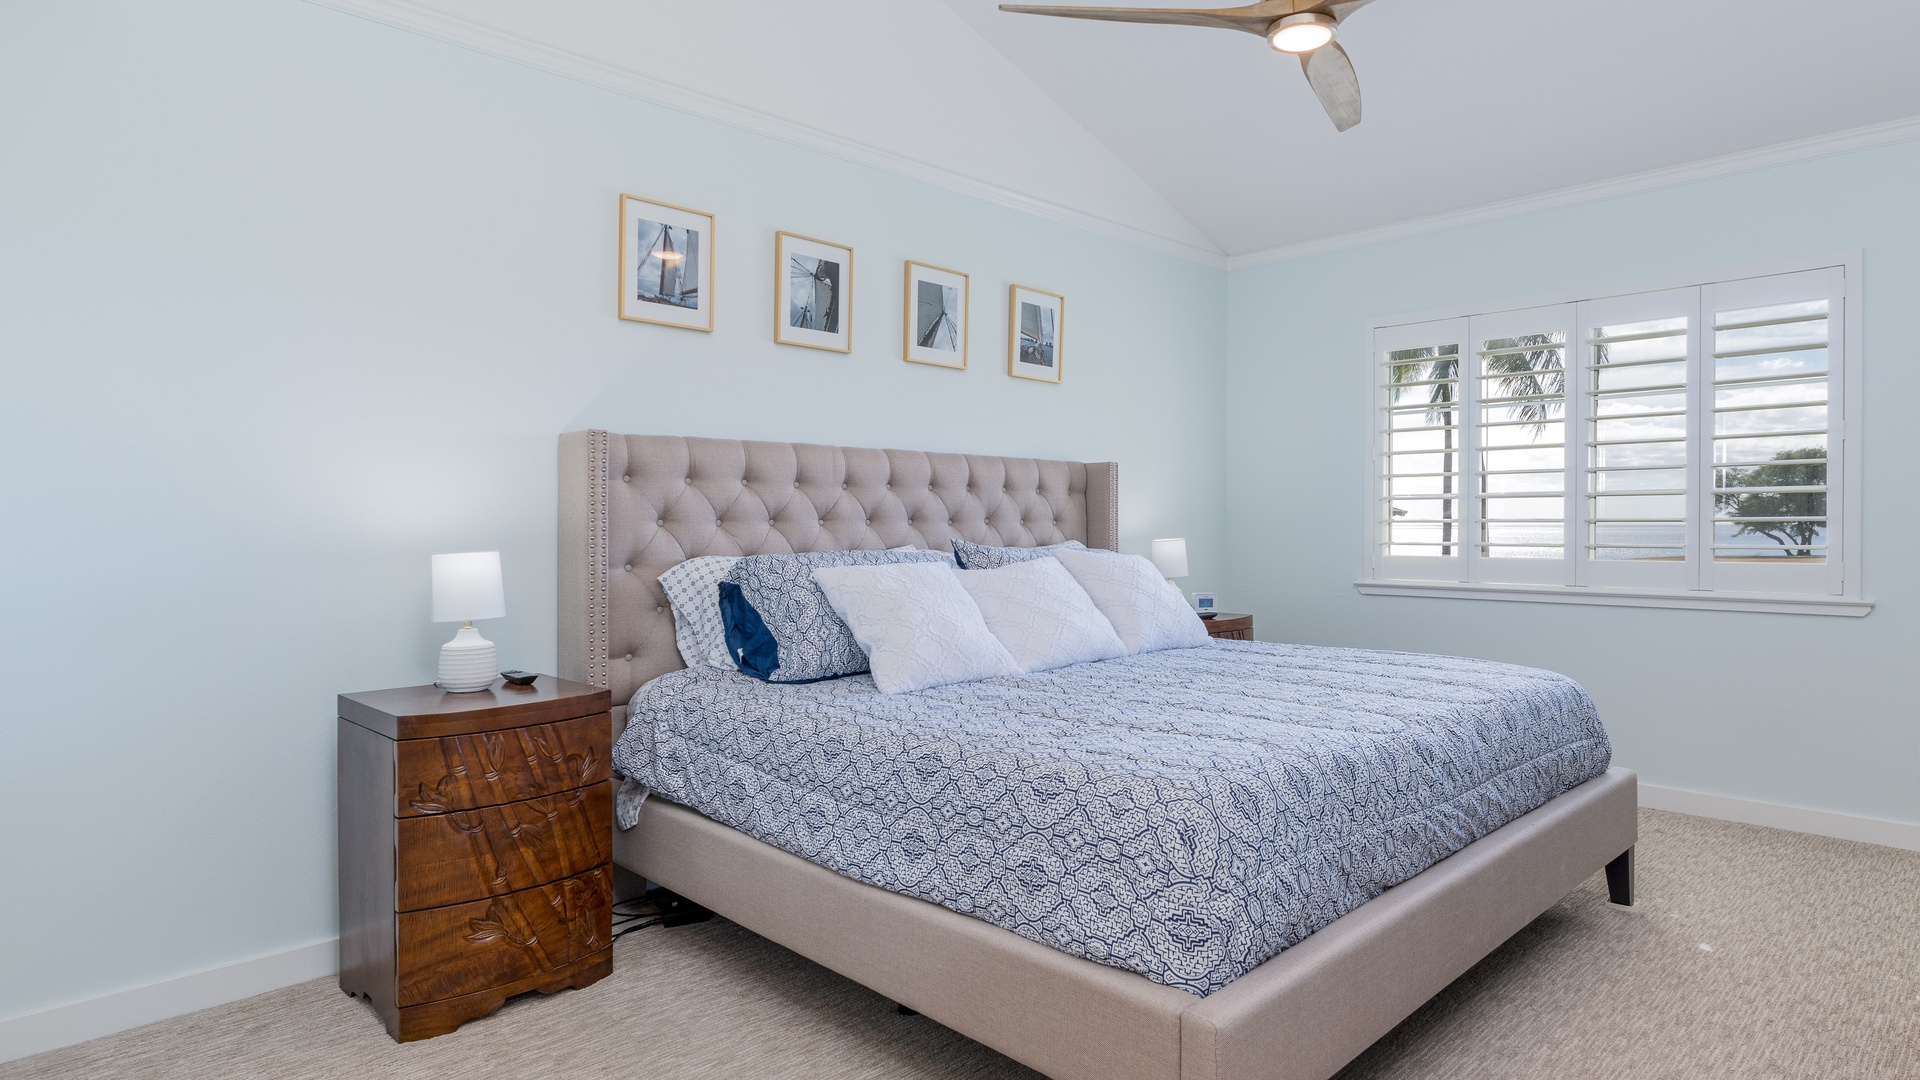 Kapolei Vacation Rentals, Kai Lani 21C - The primary guest bedroom is comfortable and spacious for a restful slumber.